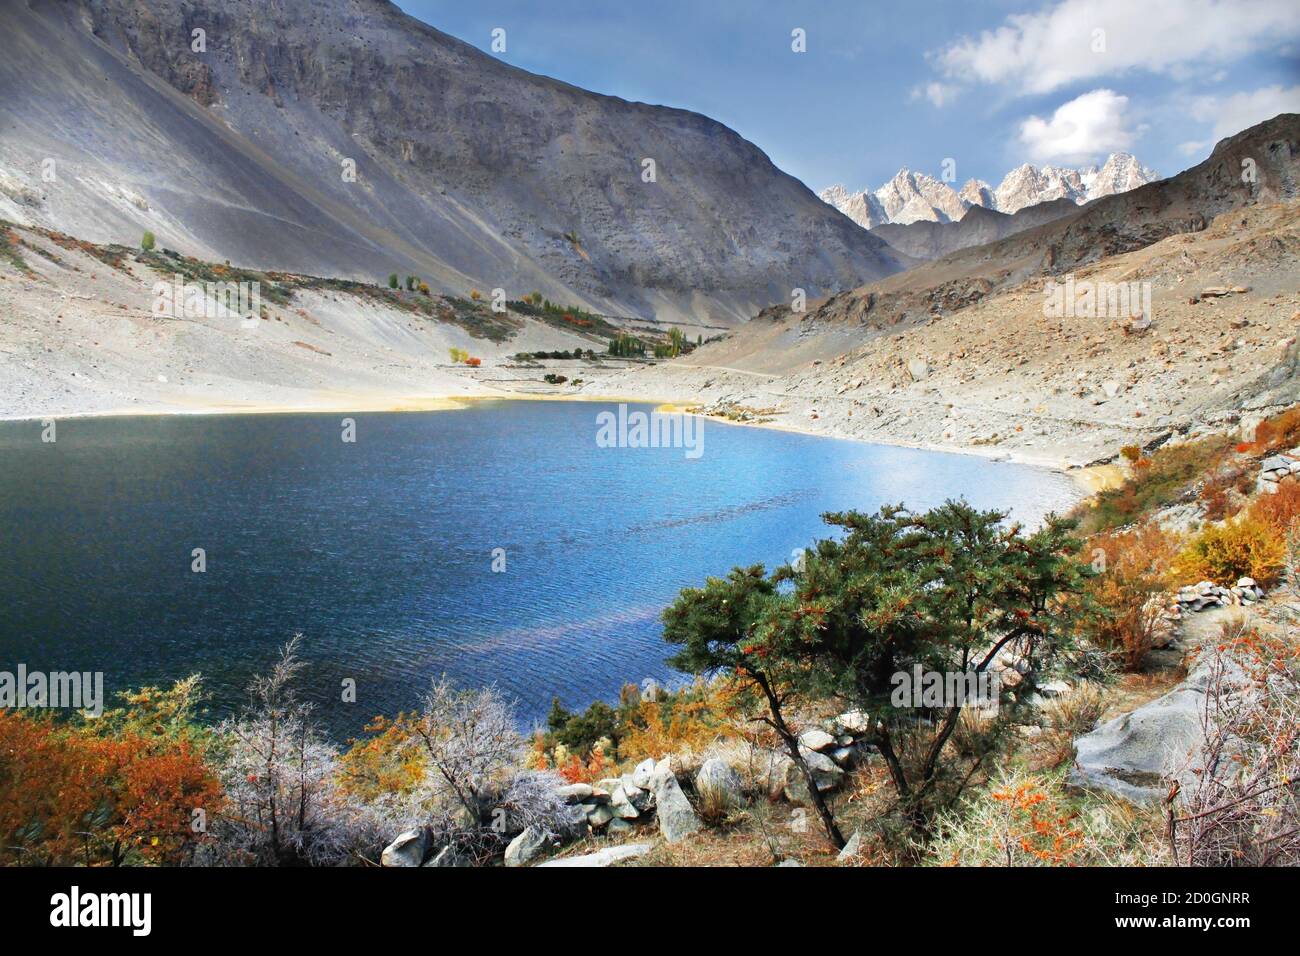 Borith Lake is a lake in Gojal, Hunza Valley in Gilgit–Baltistan, Pakistan. Borith is a hamlet in the surroundings of the Borith lake, Stock Photo